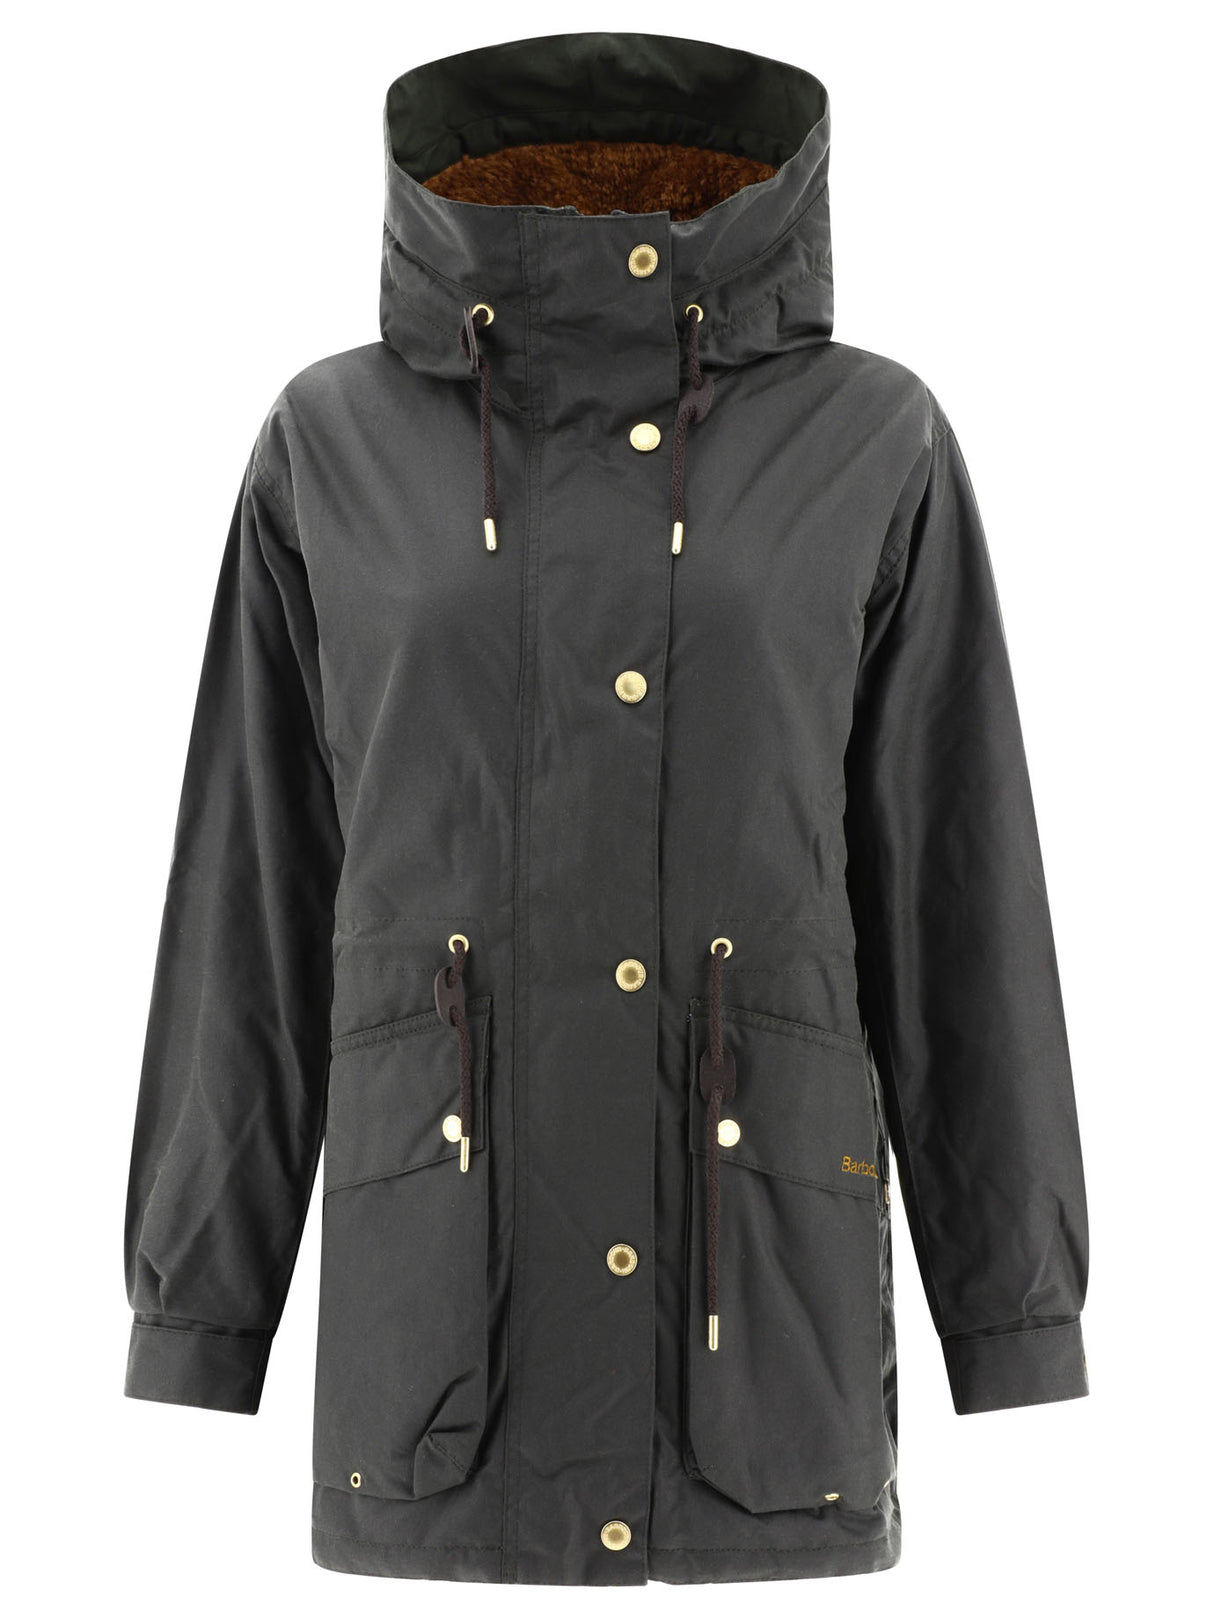 BARBOUR Green Wax Jacket for Women - Windproof with Flap Pockets